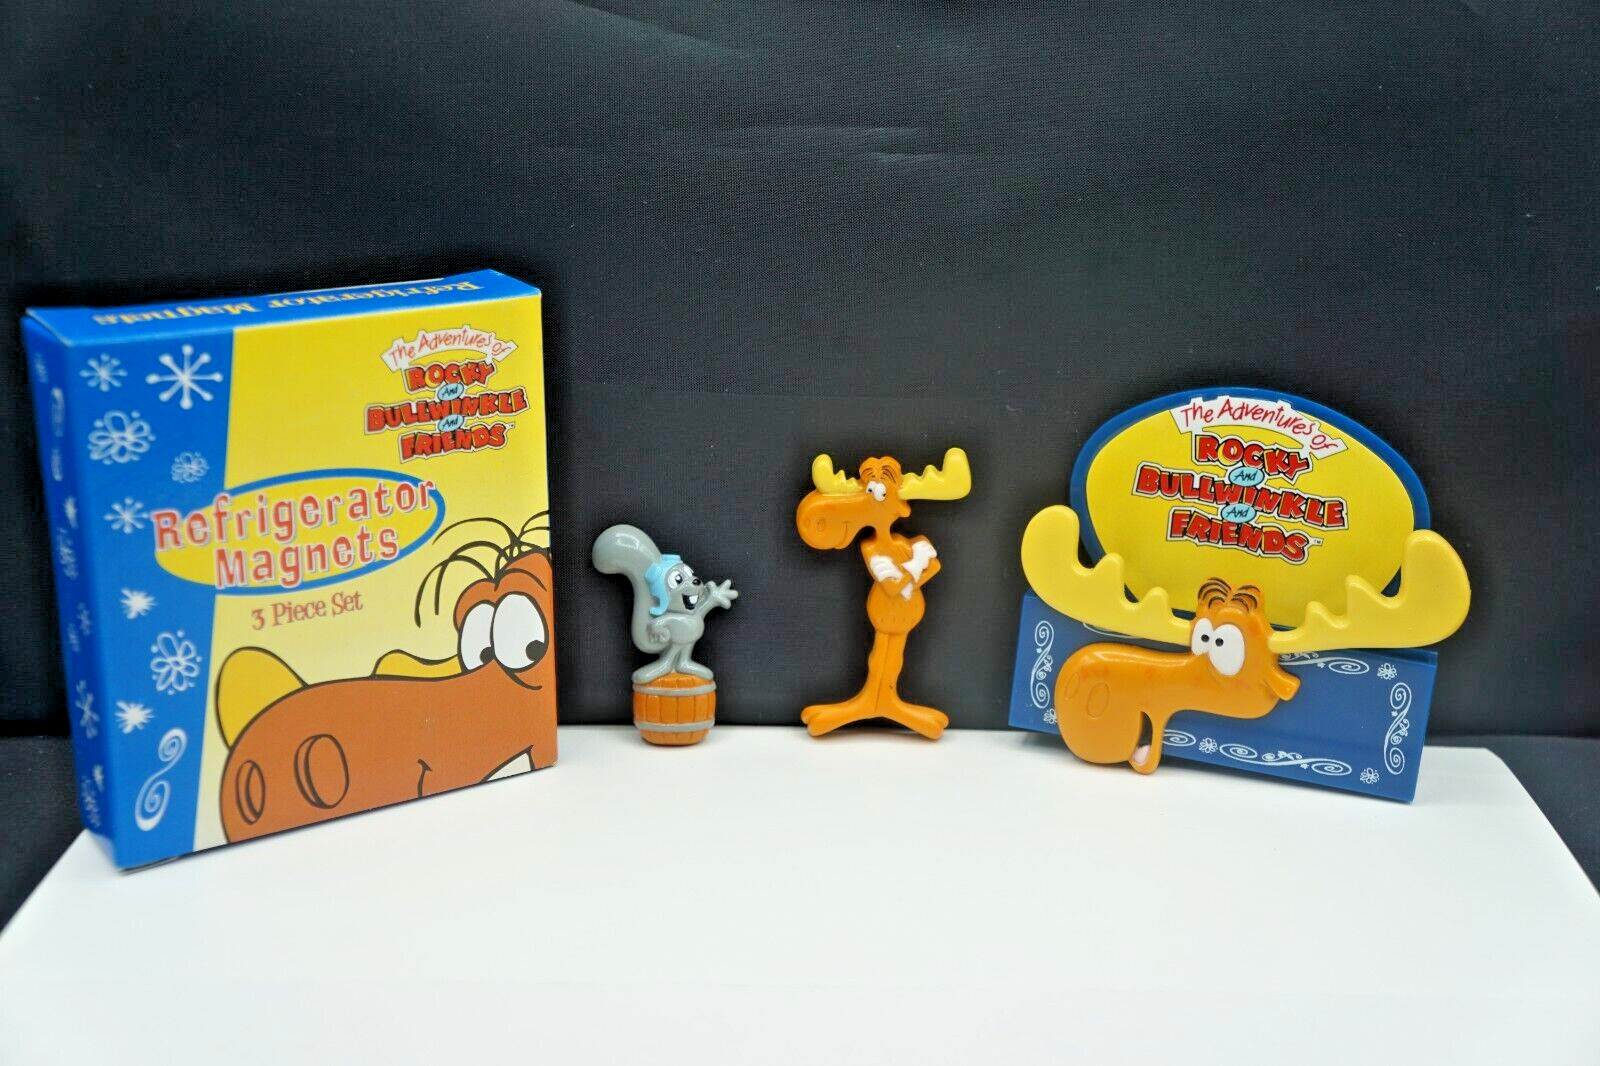 The Adventures of Rocky and Bullwinkle and Friends Magnet 3Pc Set